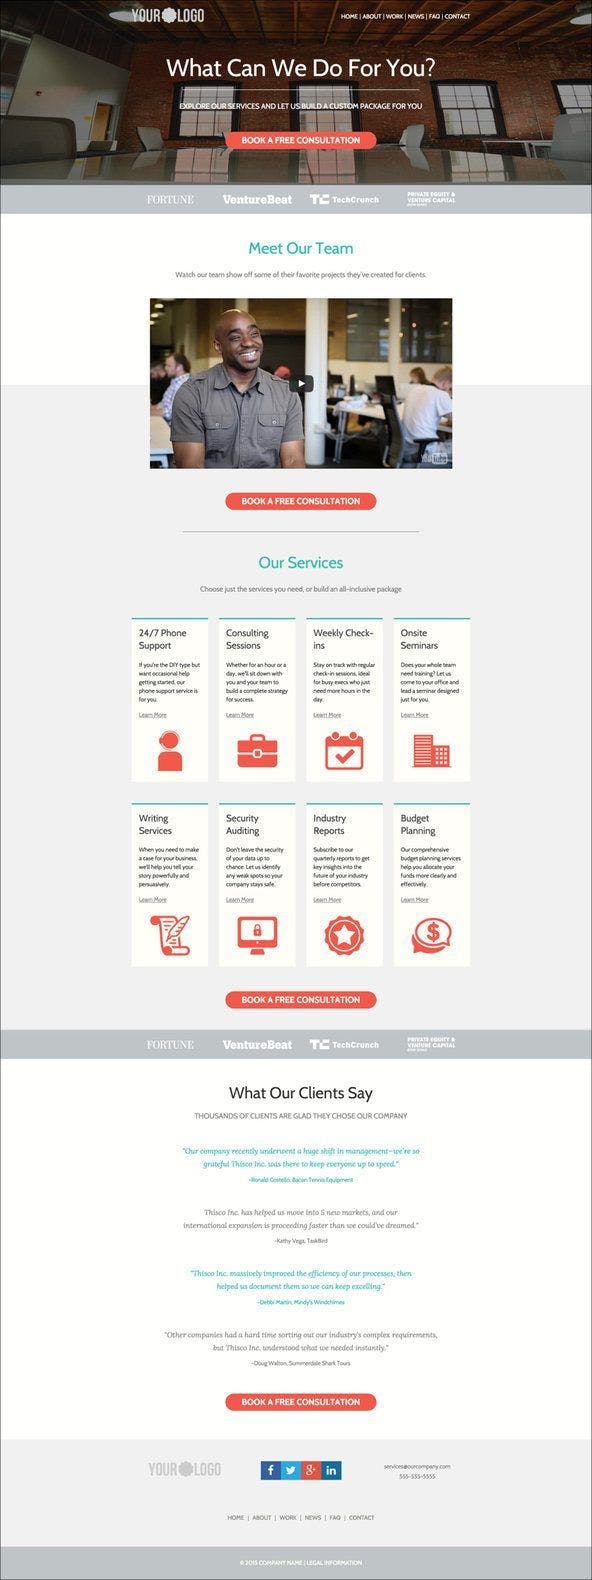 New services page design